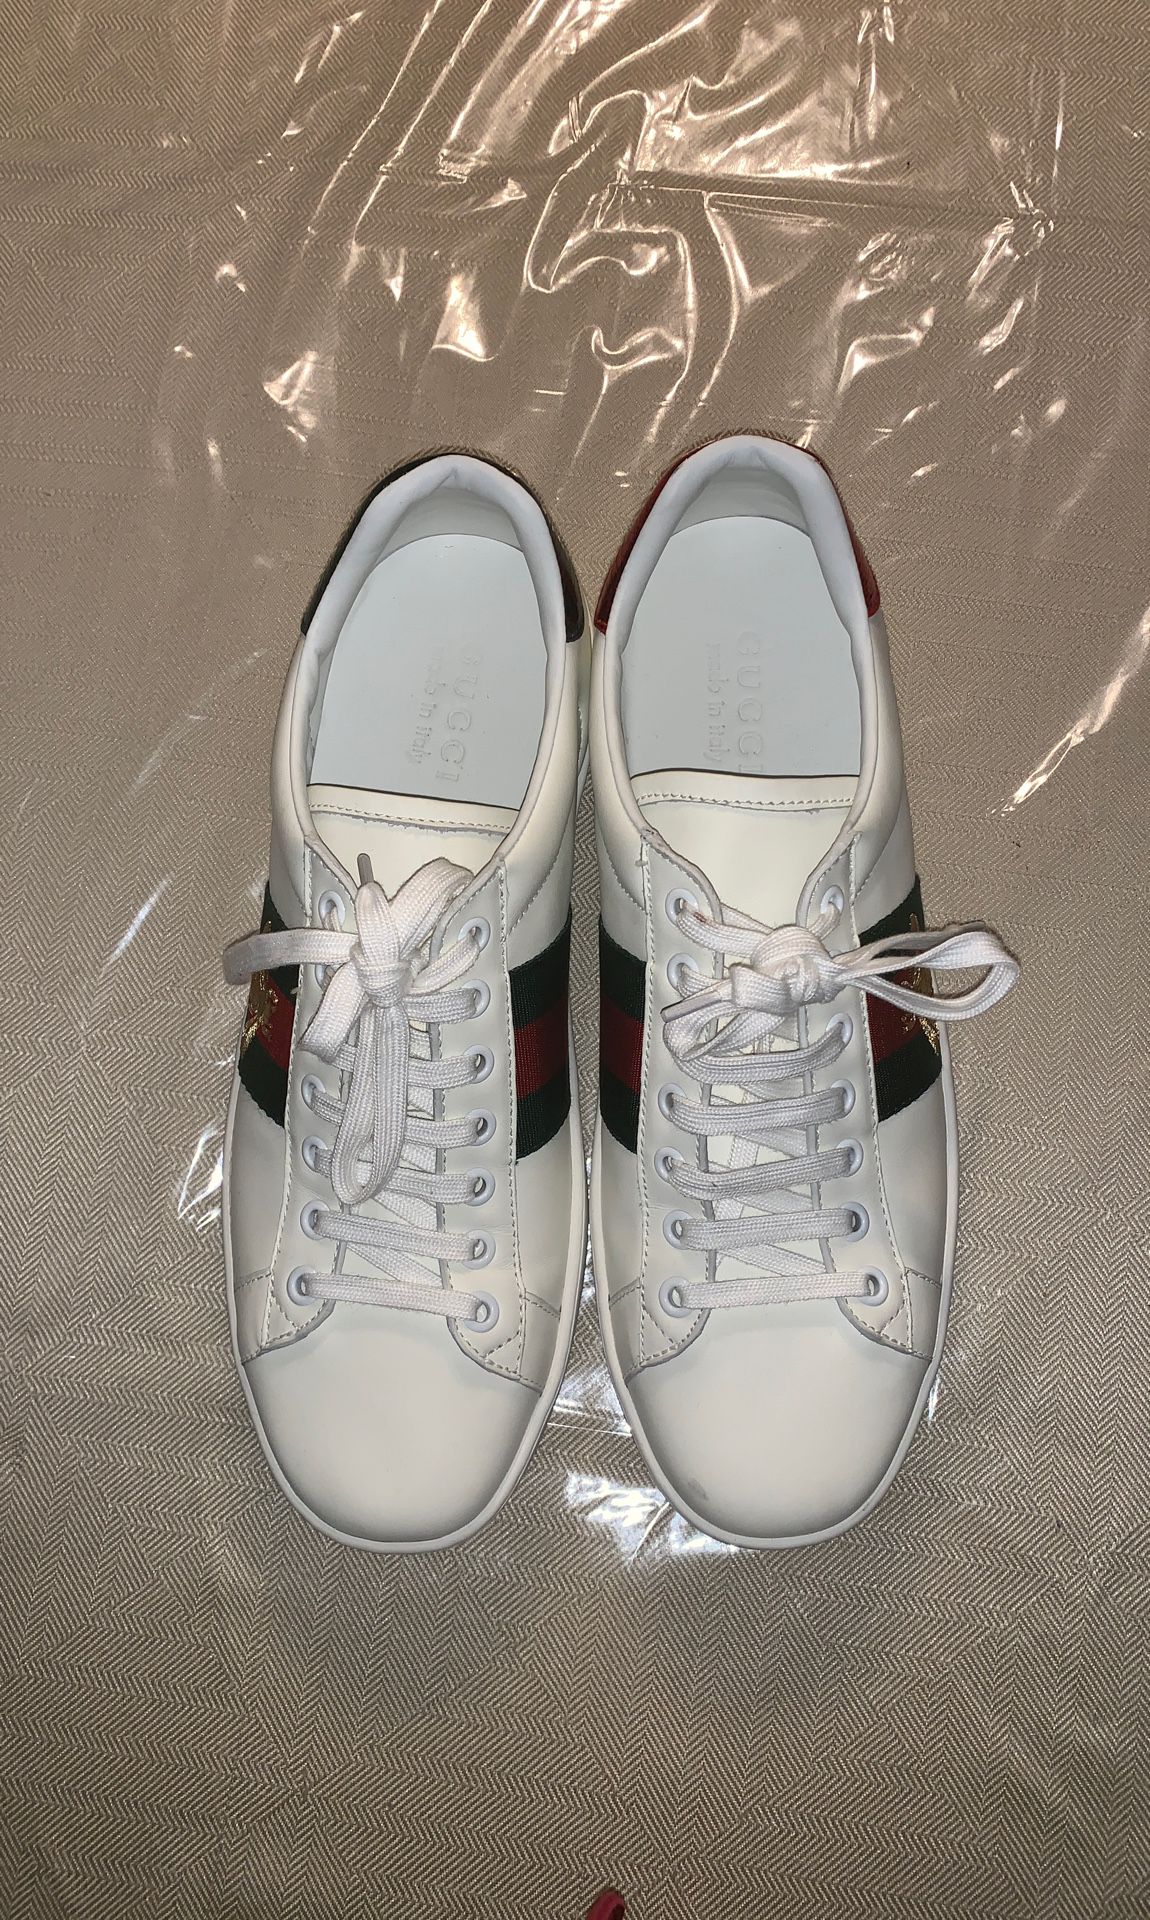 Authentic Gucci New Ace Bee Sneakers size 42